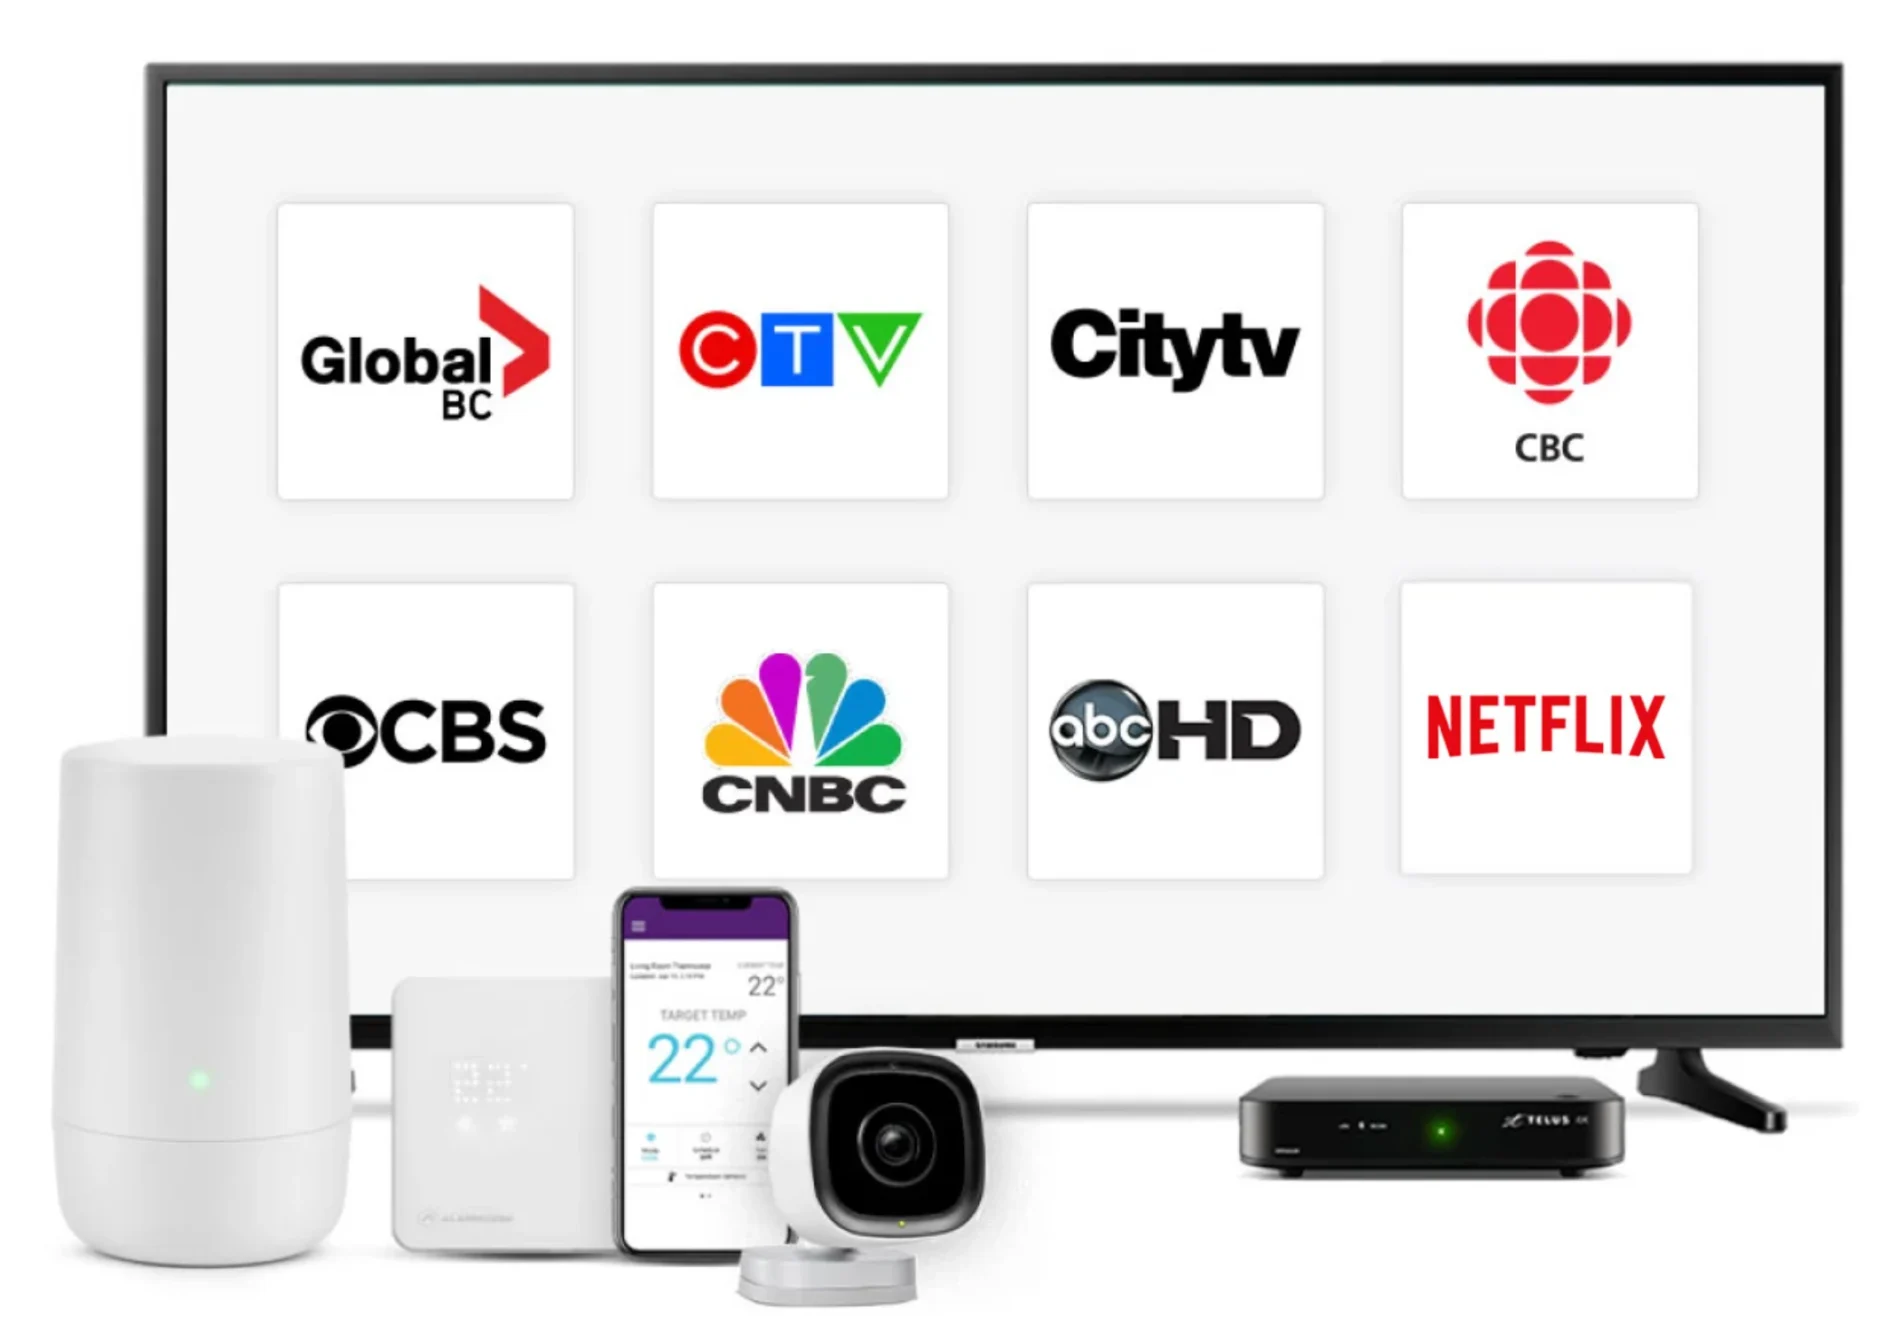 A large HD TV and PVR plus a security camera, internet router and other home security devices.